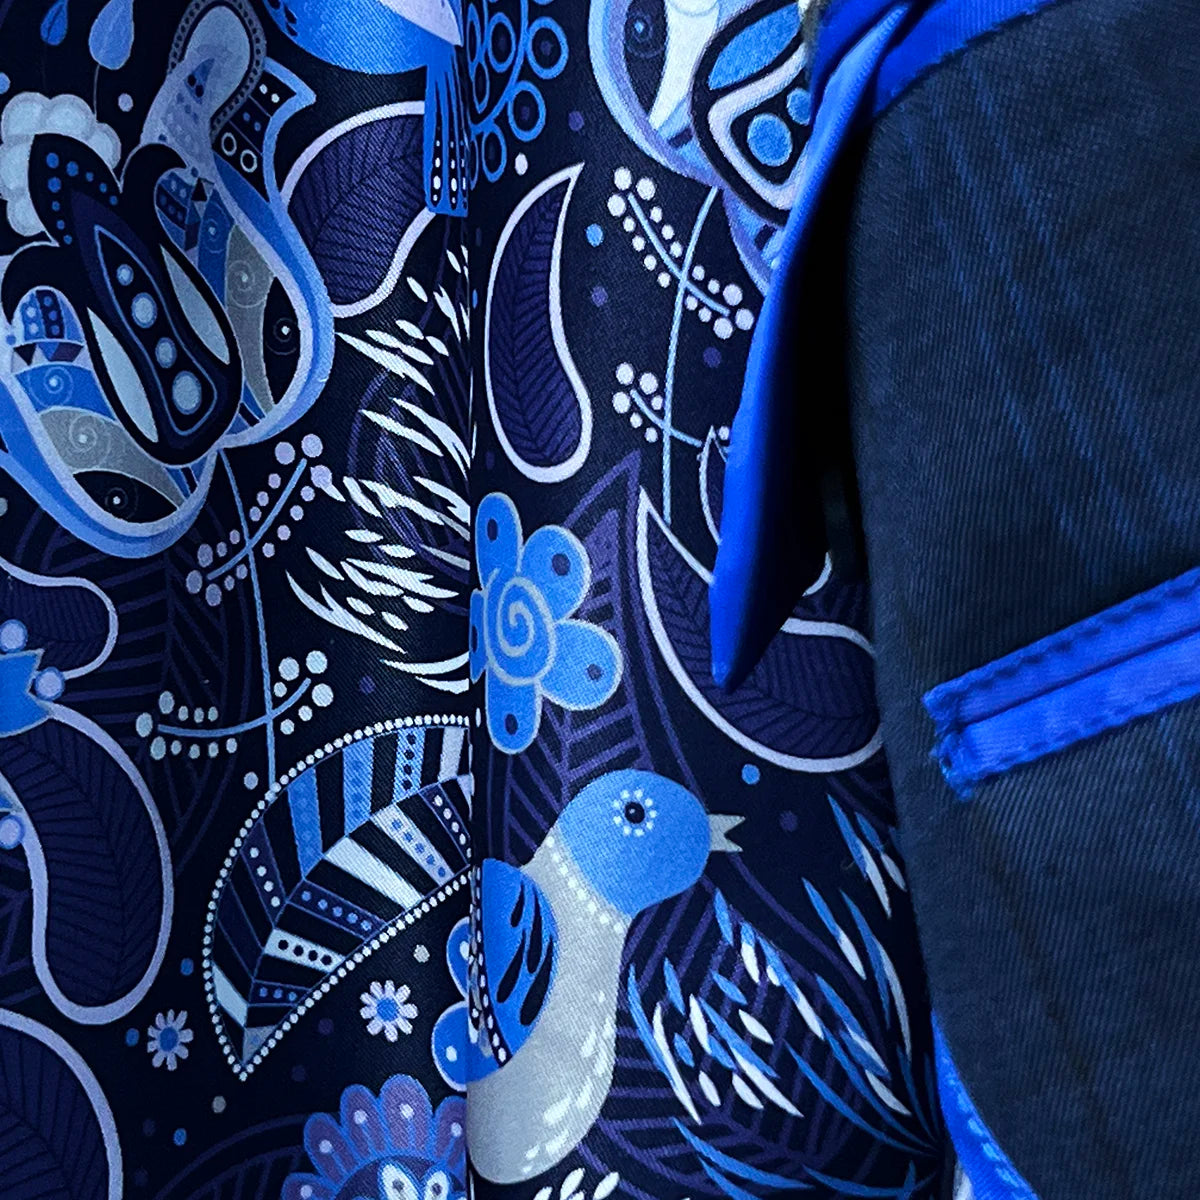 Interior view highlighting the flash linings of the dark blue windowpane men's sport coat with blue and white aviary motif.